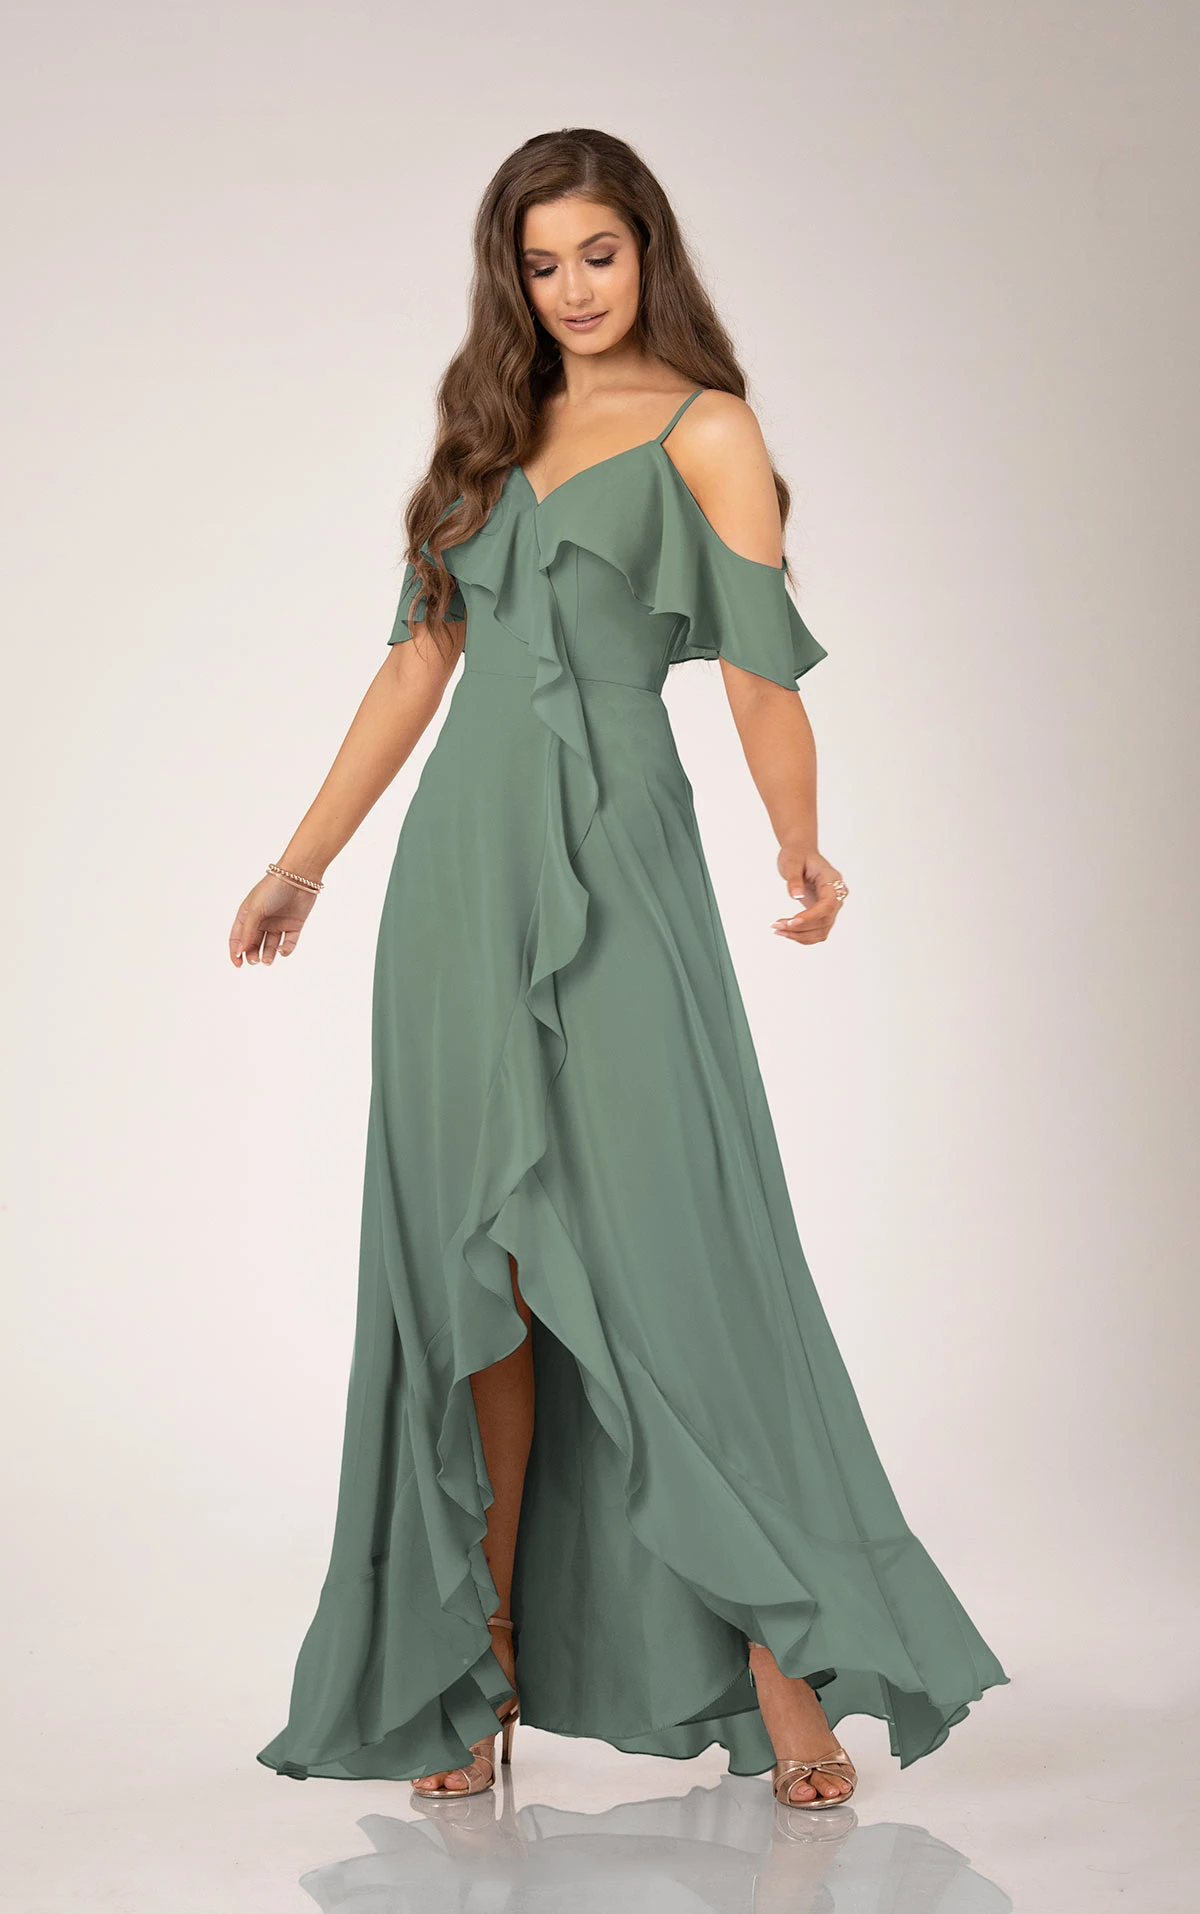 BohoInspired Bridesmaid Dress with Flowy Ruffle Details